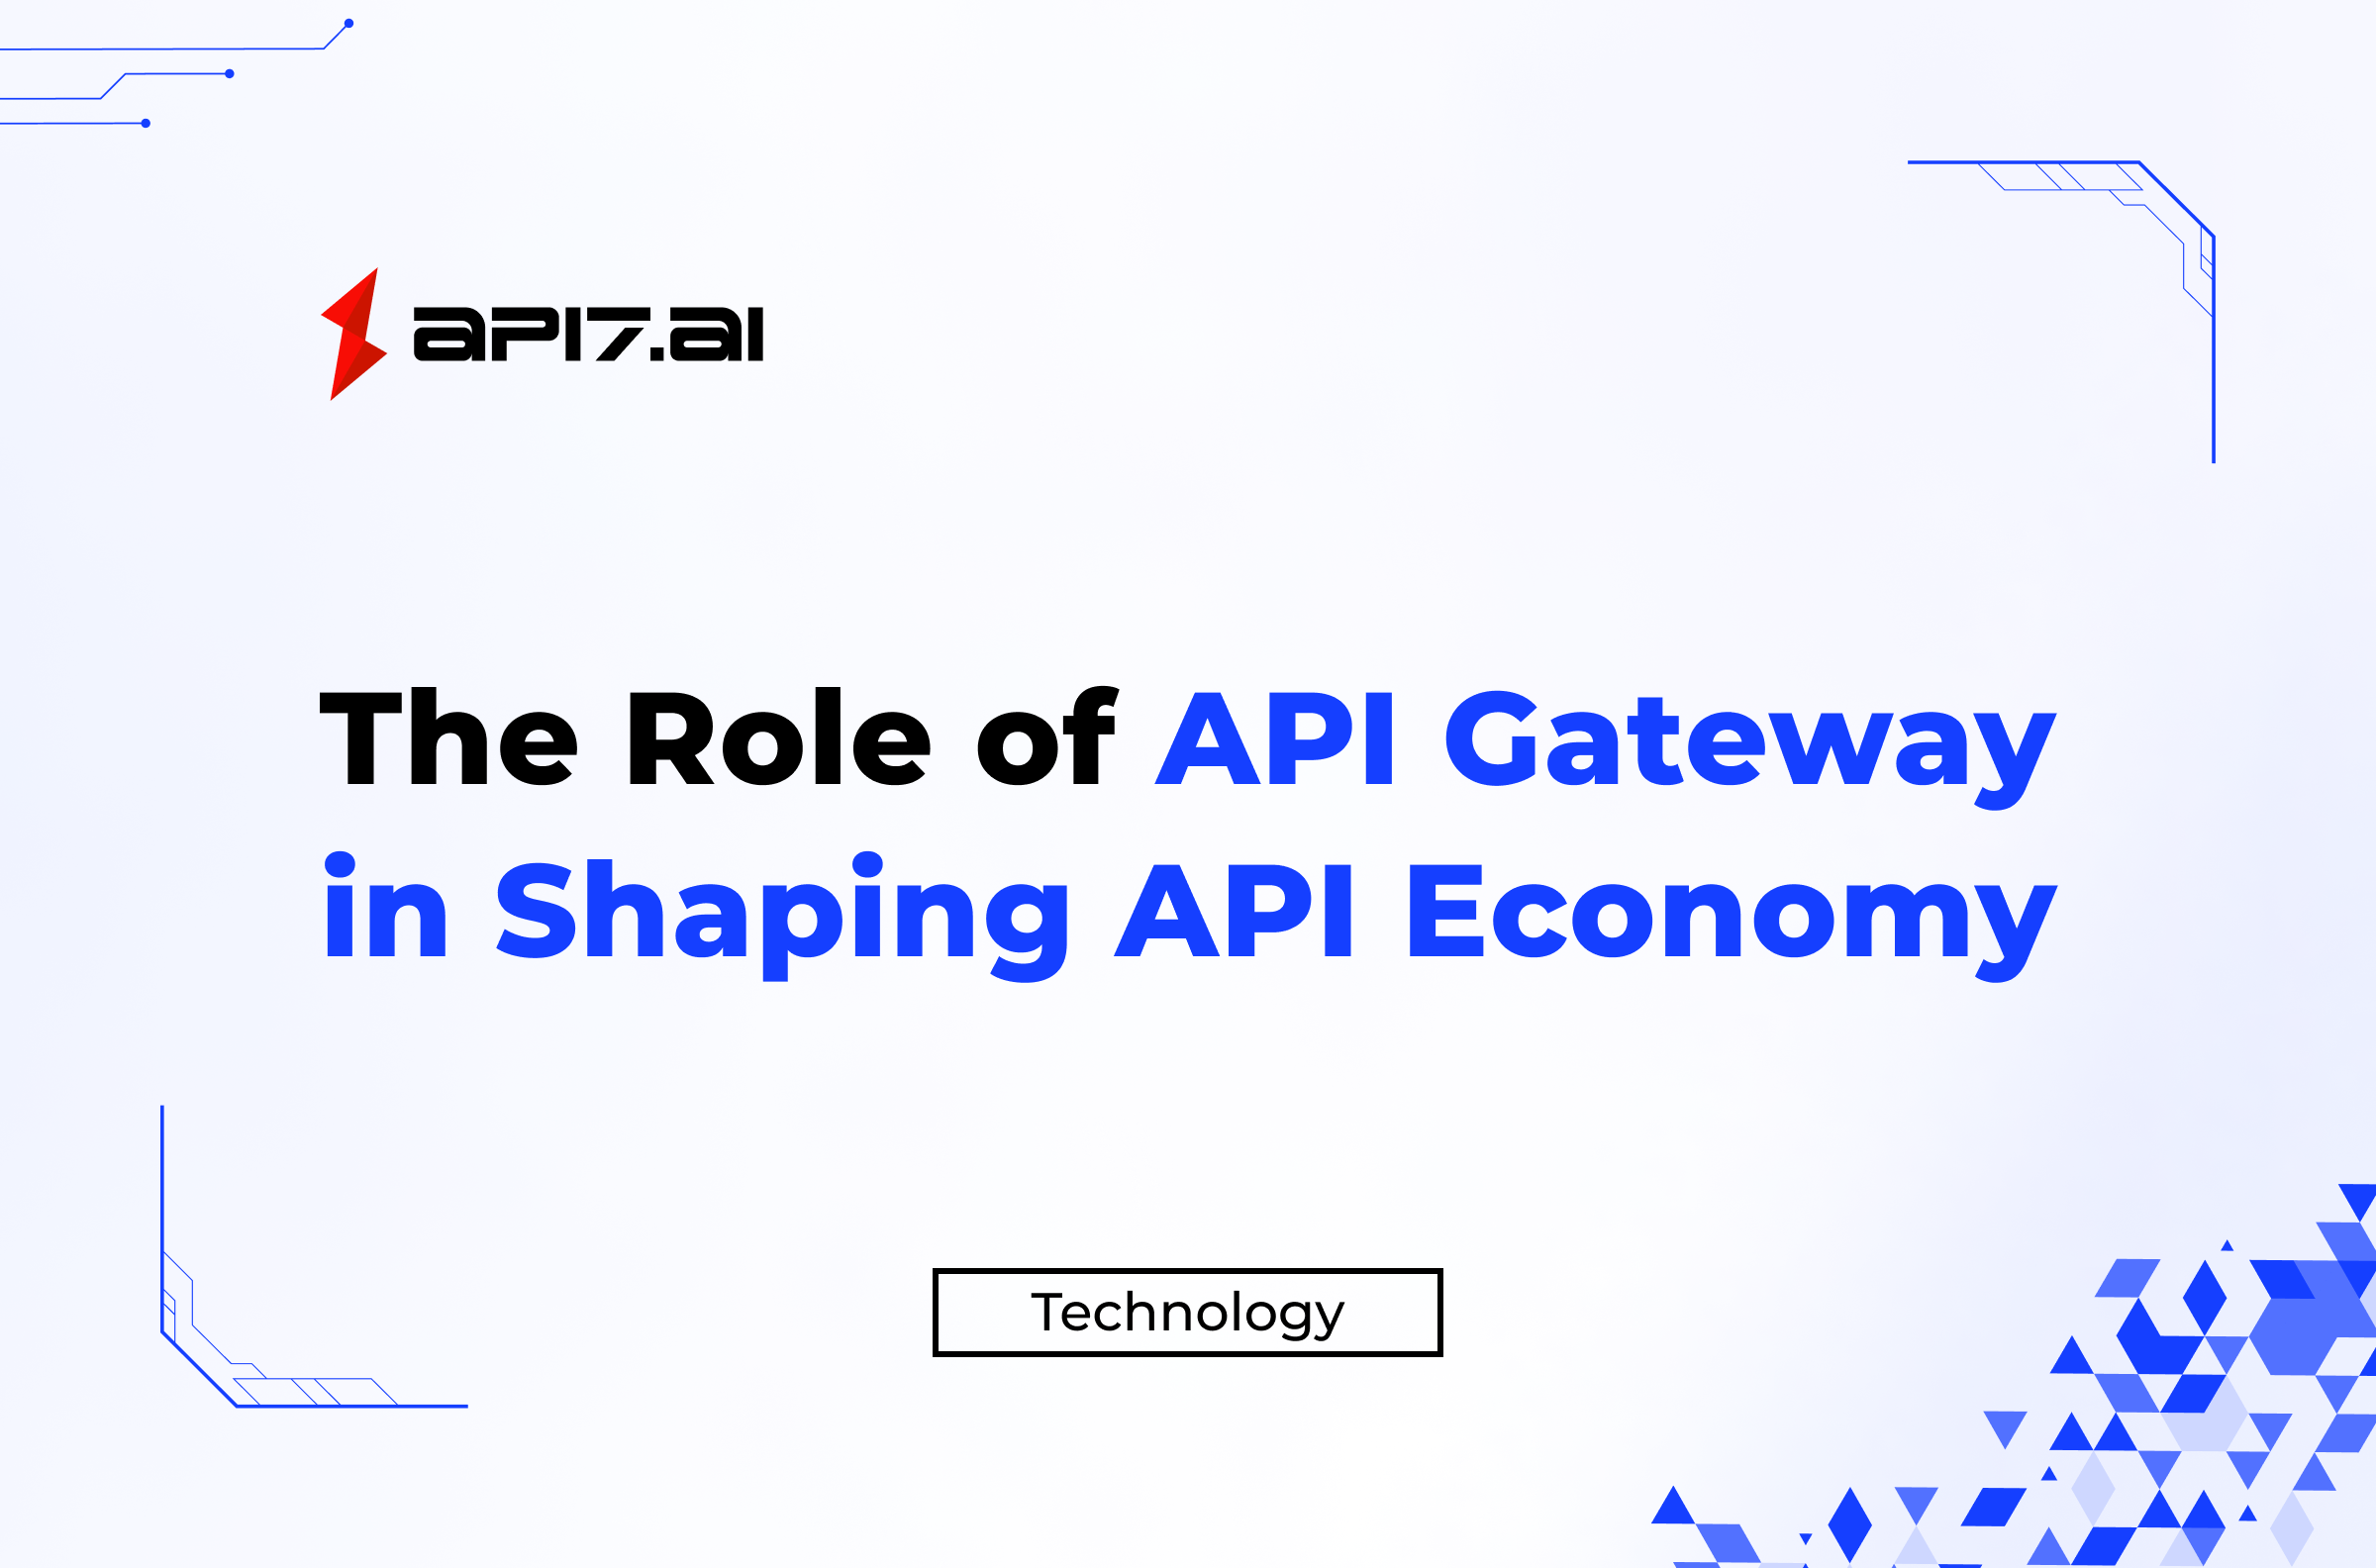 The Role of API Gateway in Shaping API Economy